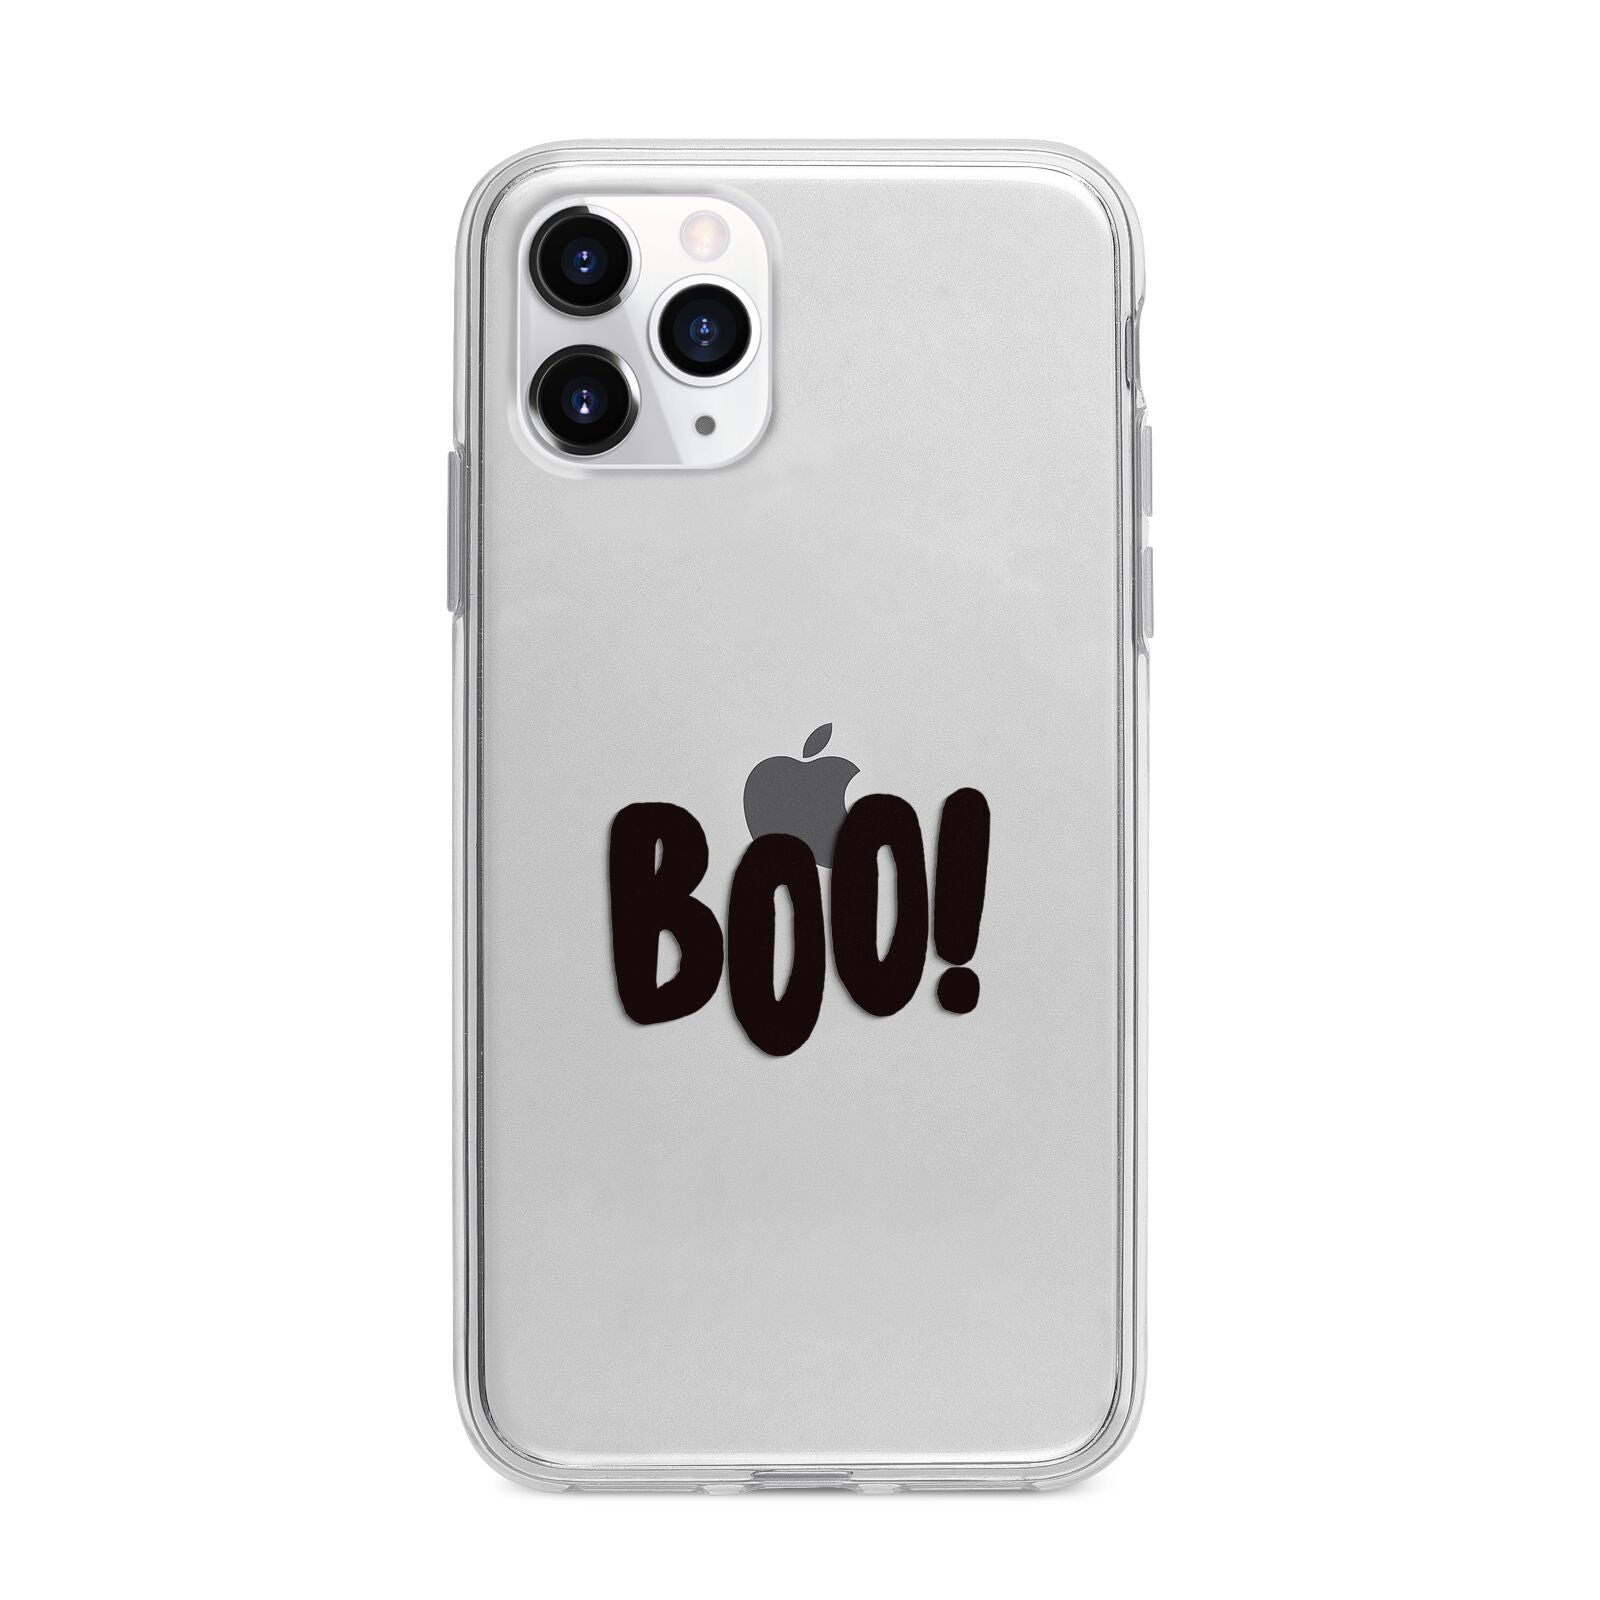 Boo Black Apple iPhone 11 Pro in Silver with Bumper Case